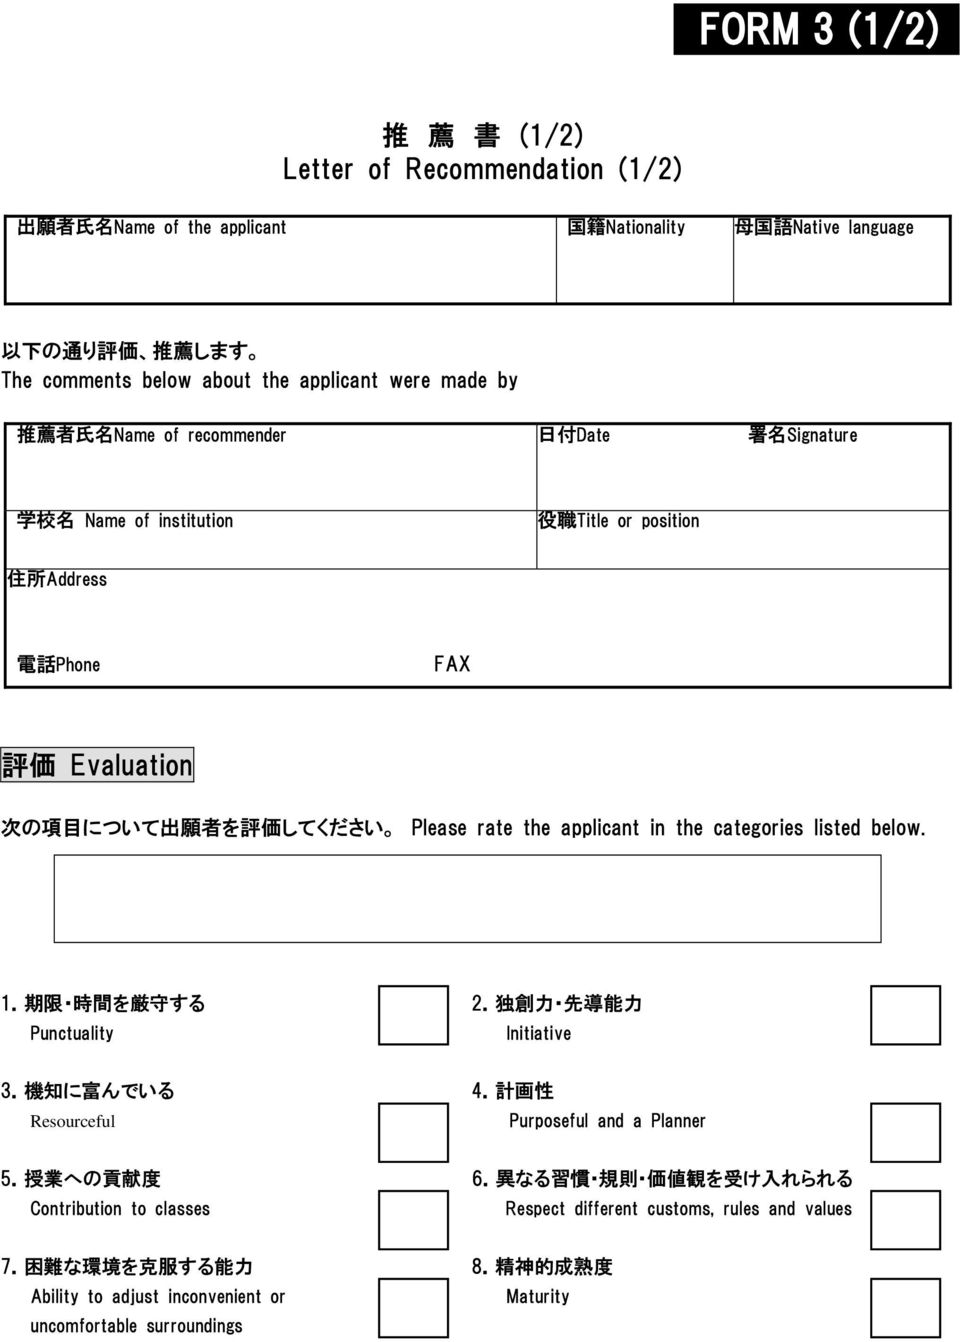 the applicant in the categories listed below. 1. 期 限 時 間 を 厳 守 する 2. 独 創 力 先 導 能 力 Punctuality Initiative 3. 機 知 に 富 んでいる 4. 計 画 性 Resourceful Purposeful and a Planner 5. 授 業 への 貢 献 度 6.